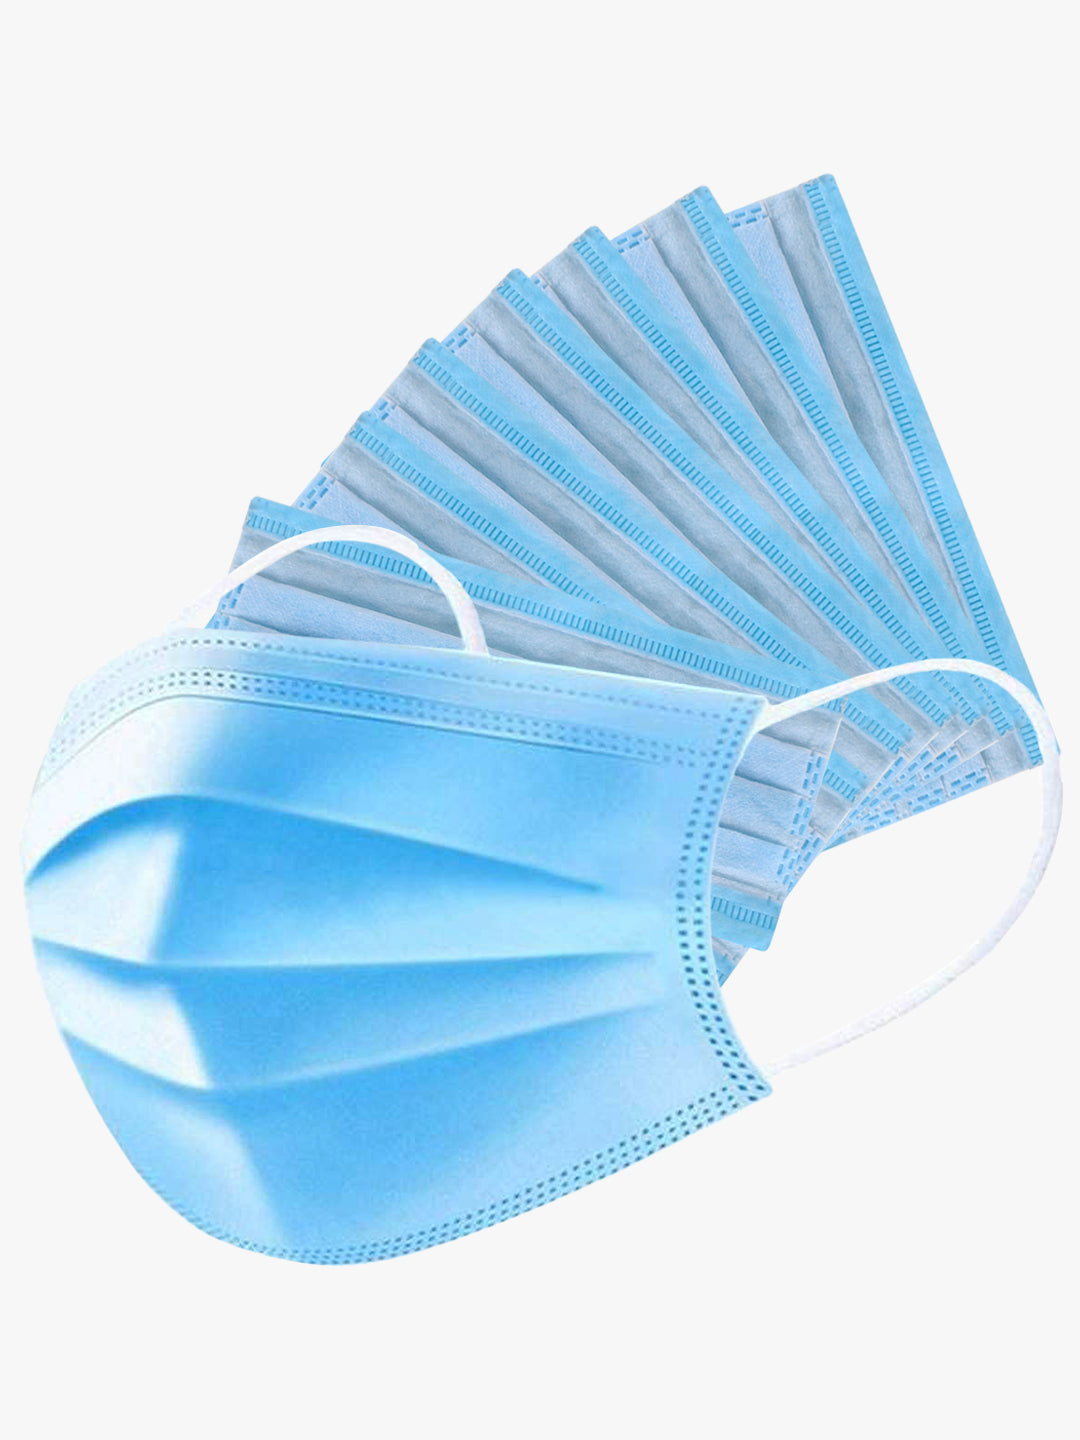 Disposable pollutio Mask (Pack of 100)